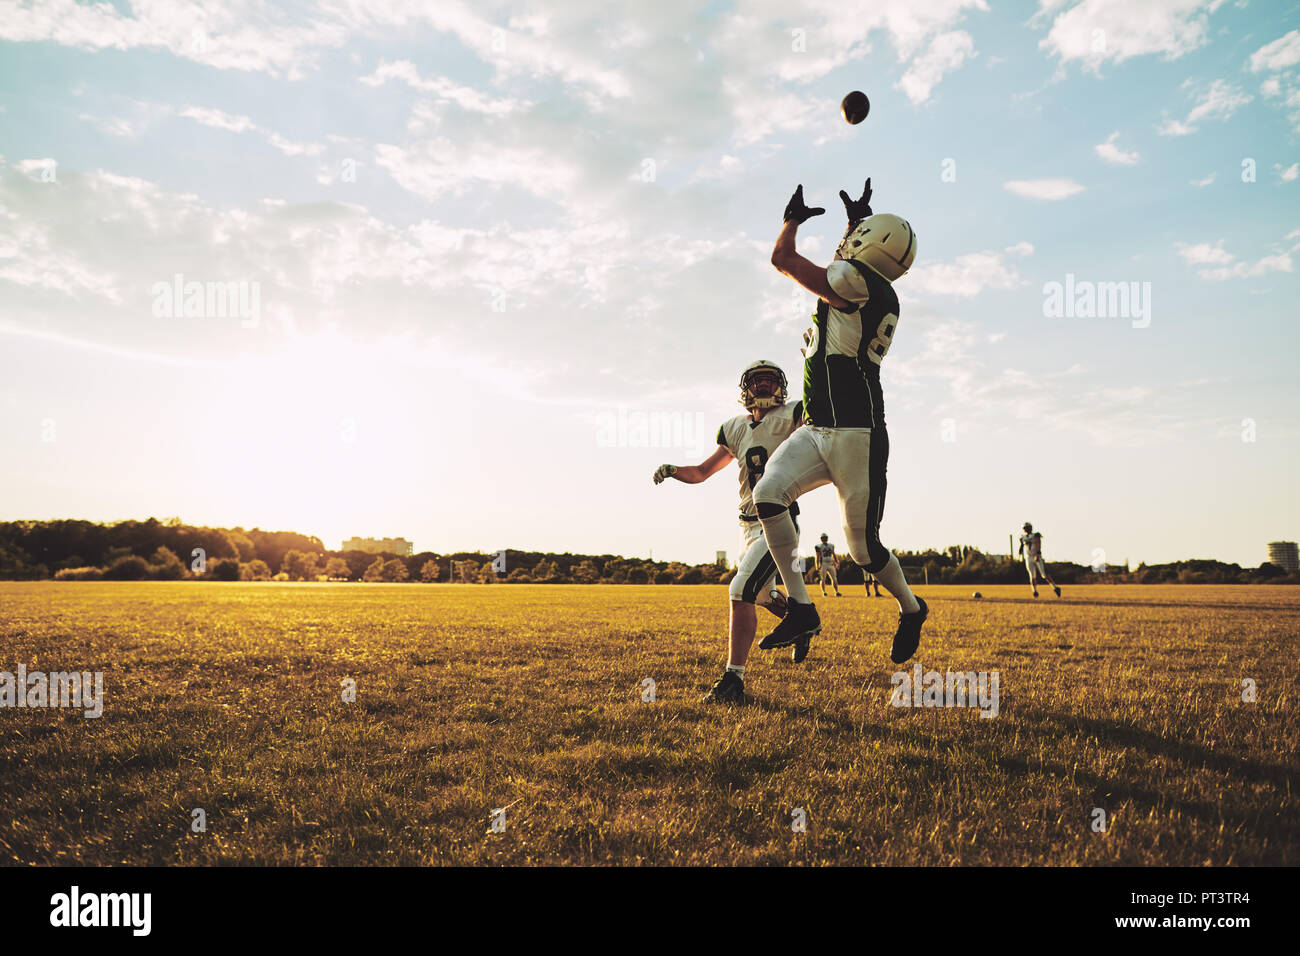 Young American football player receiving a pass during team practice on a football field in the afternoon Stock Photo